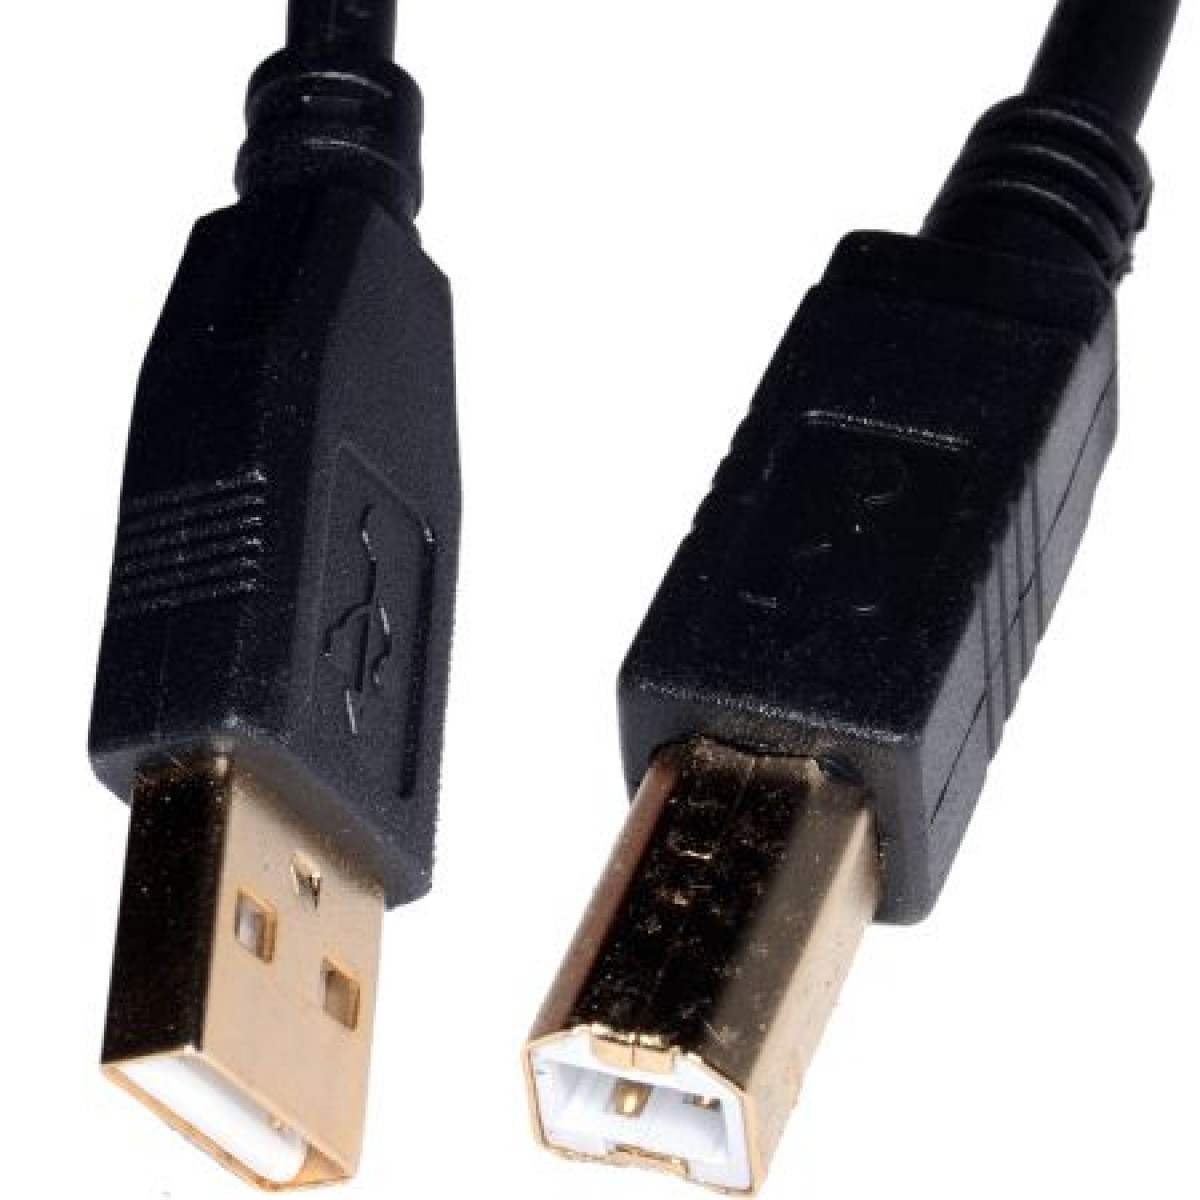 connect mac to pc usb cable